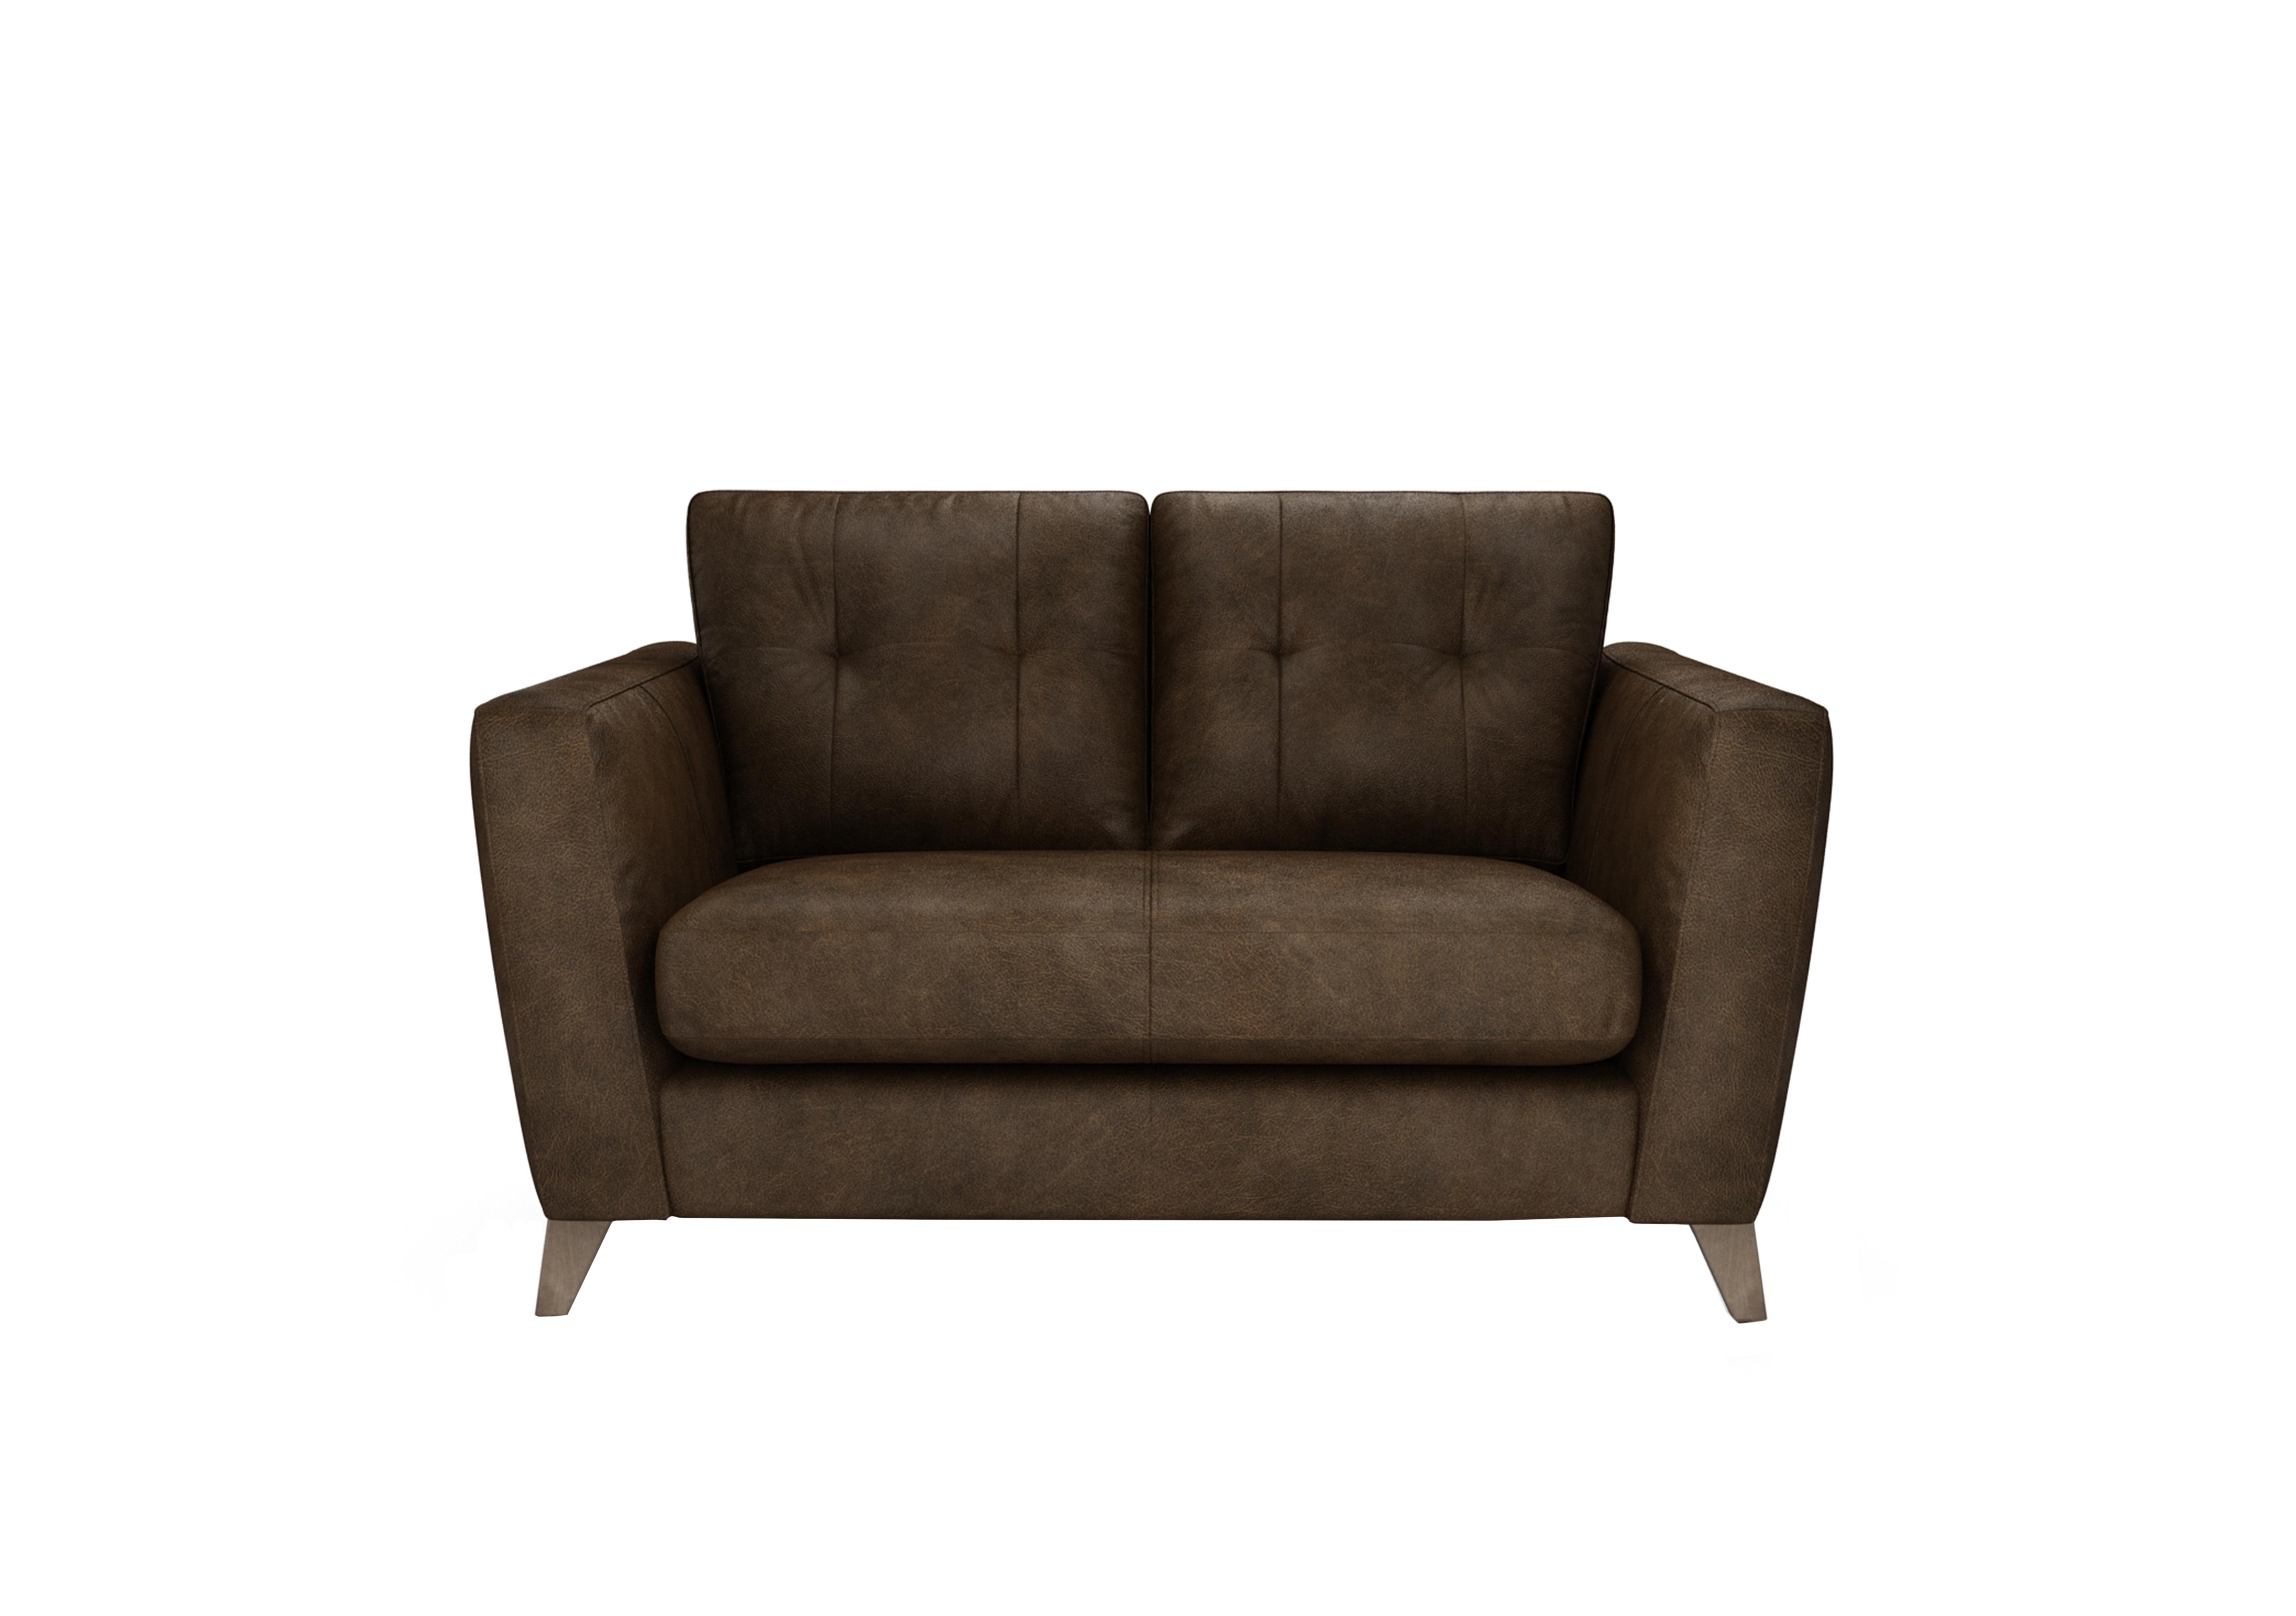 Hermione 2 Seater Leather Sofa in Bou192 Bourbon Wo Ft on Furniture Village